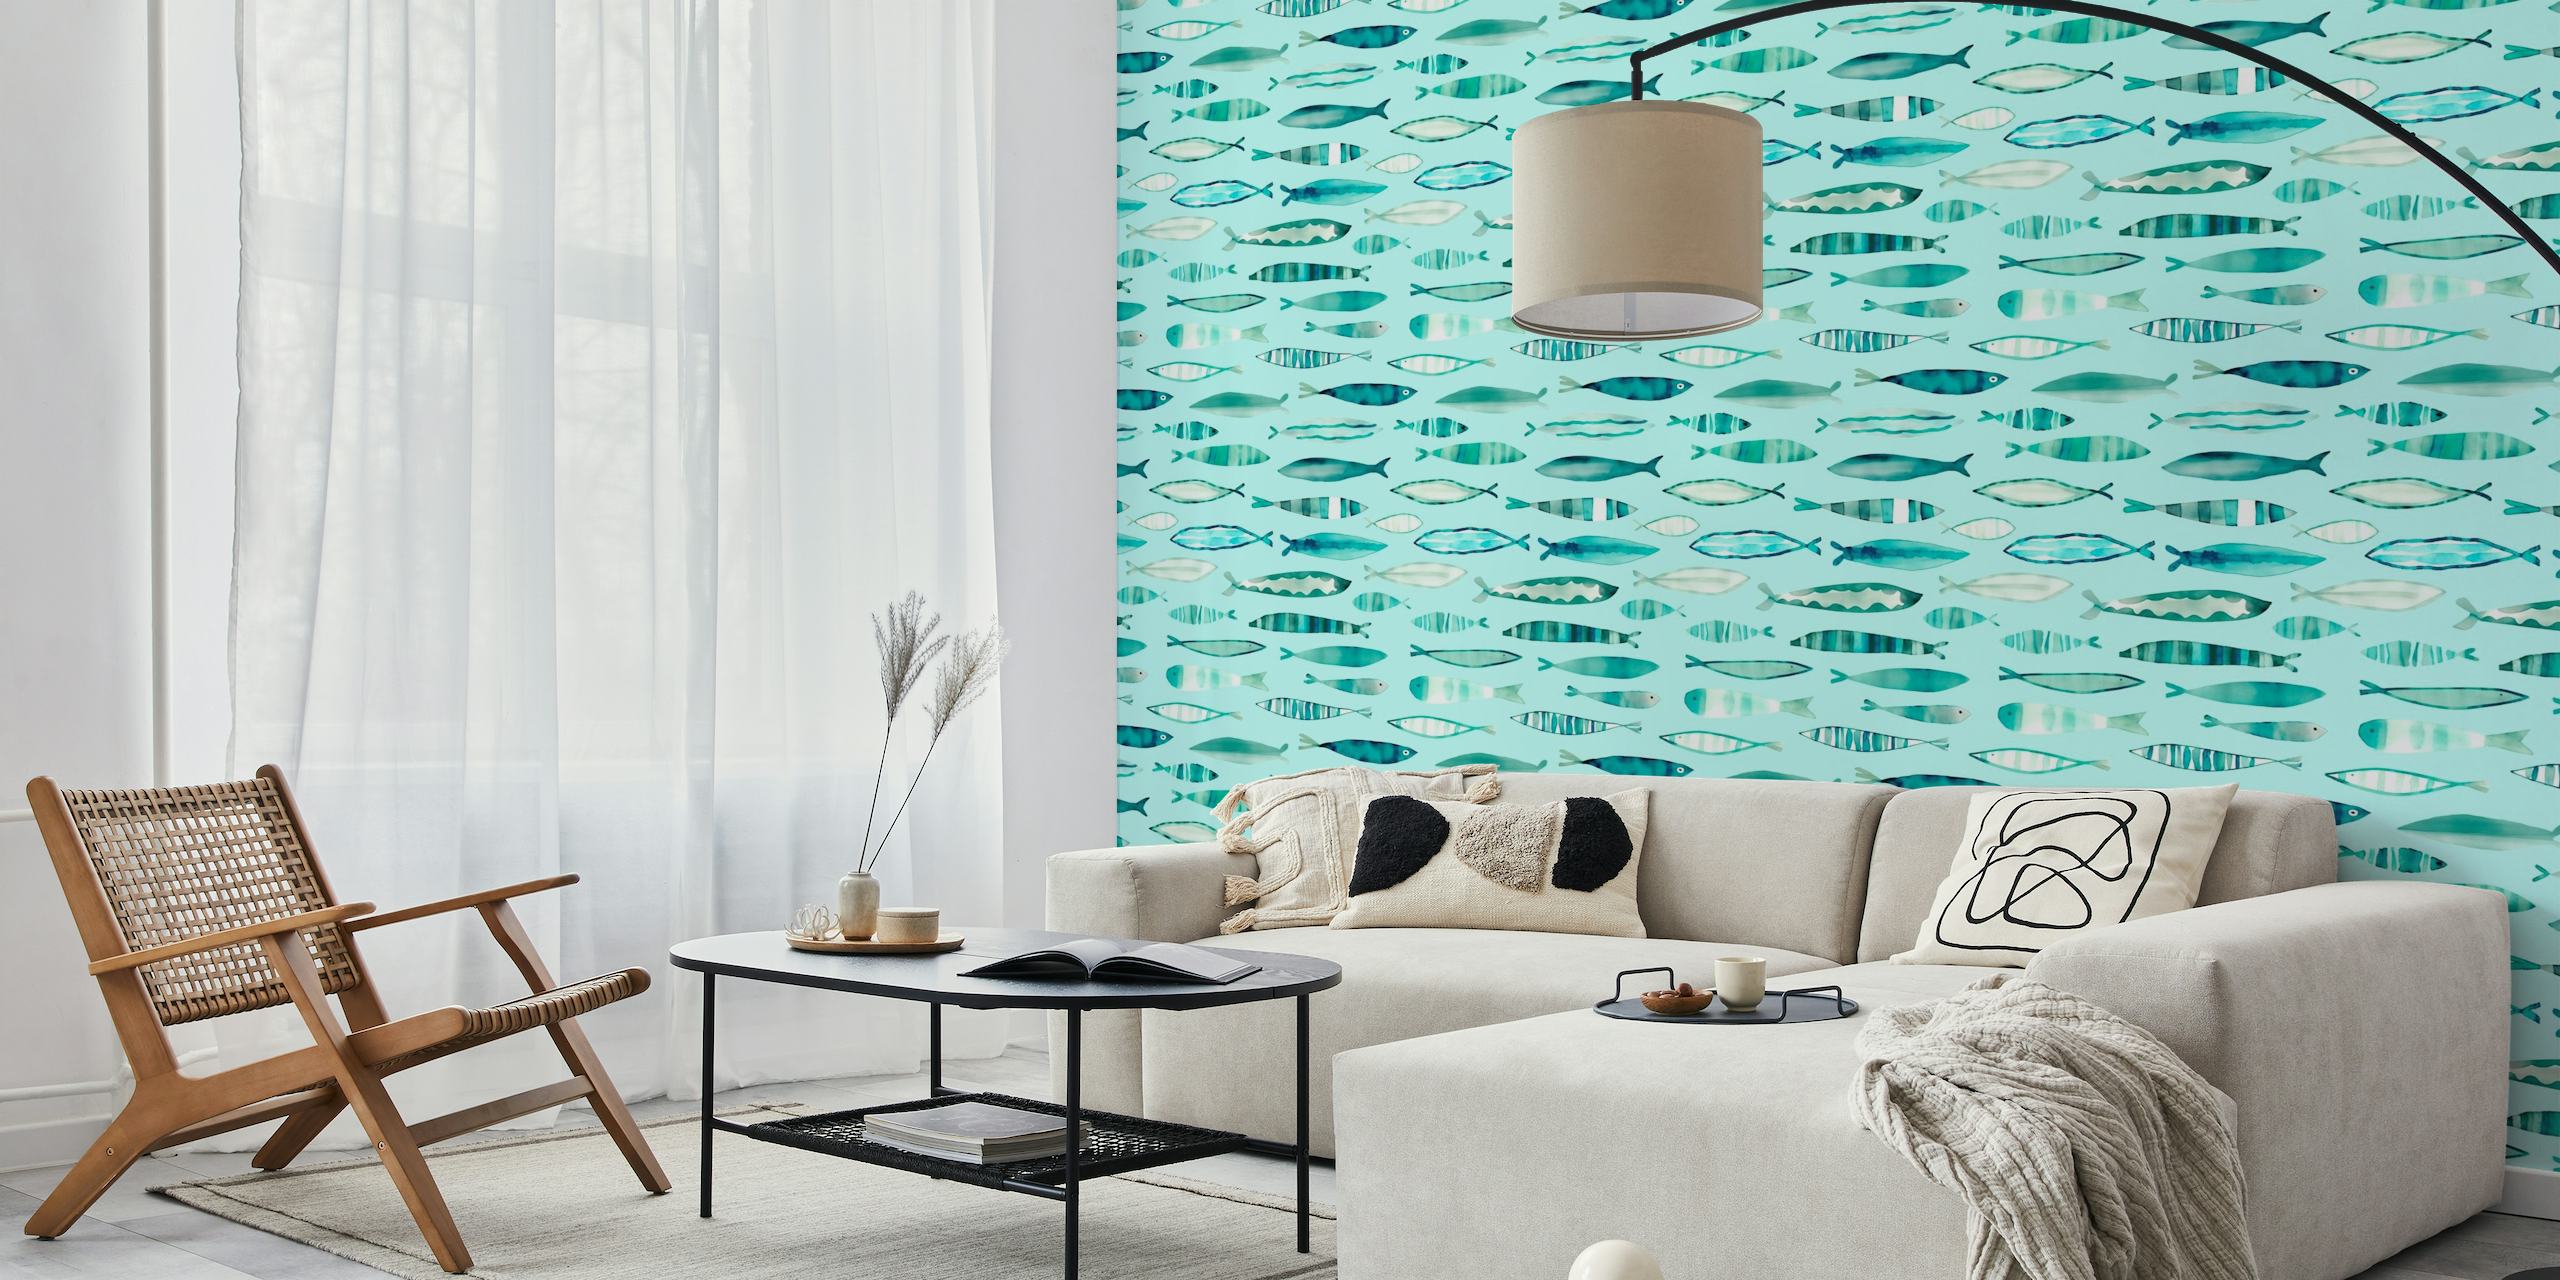 Teal and blue watercolor fish pattern wall mural